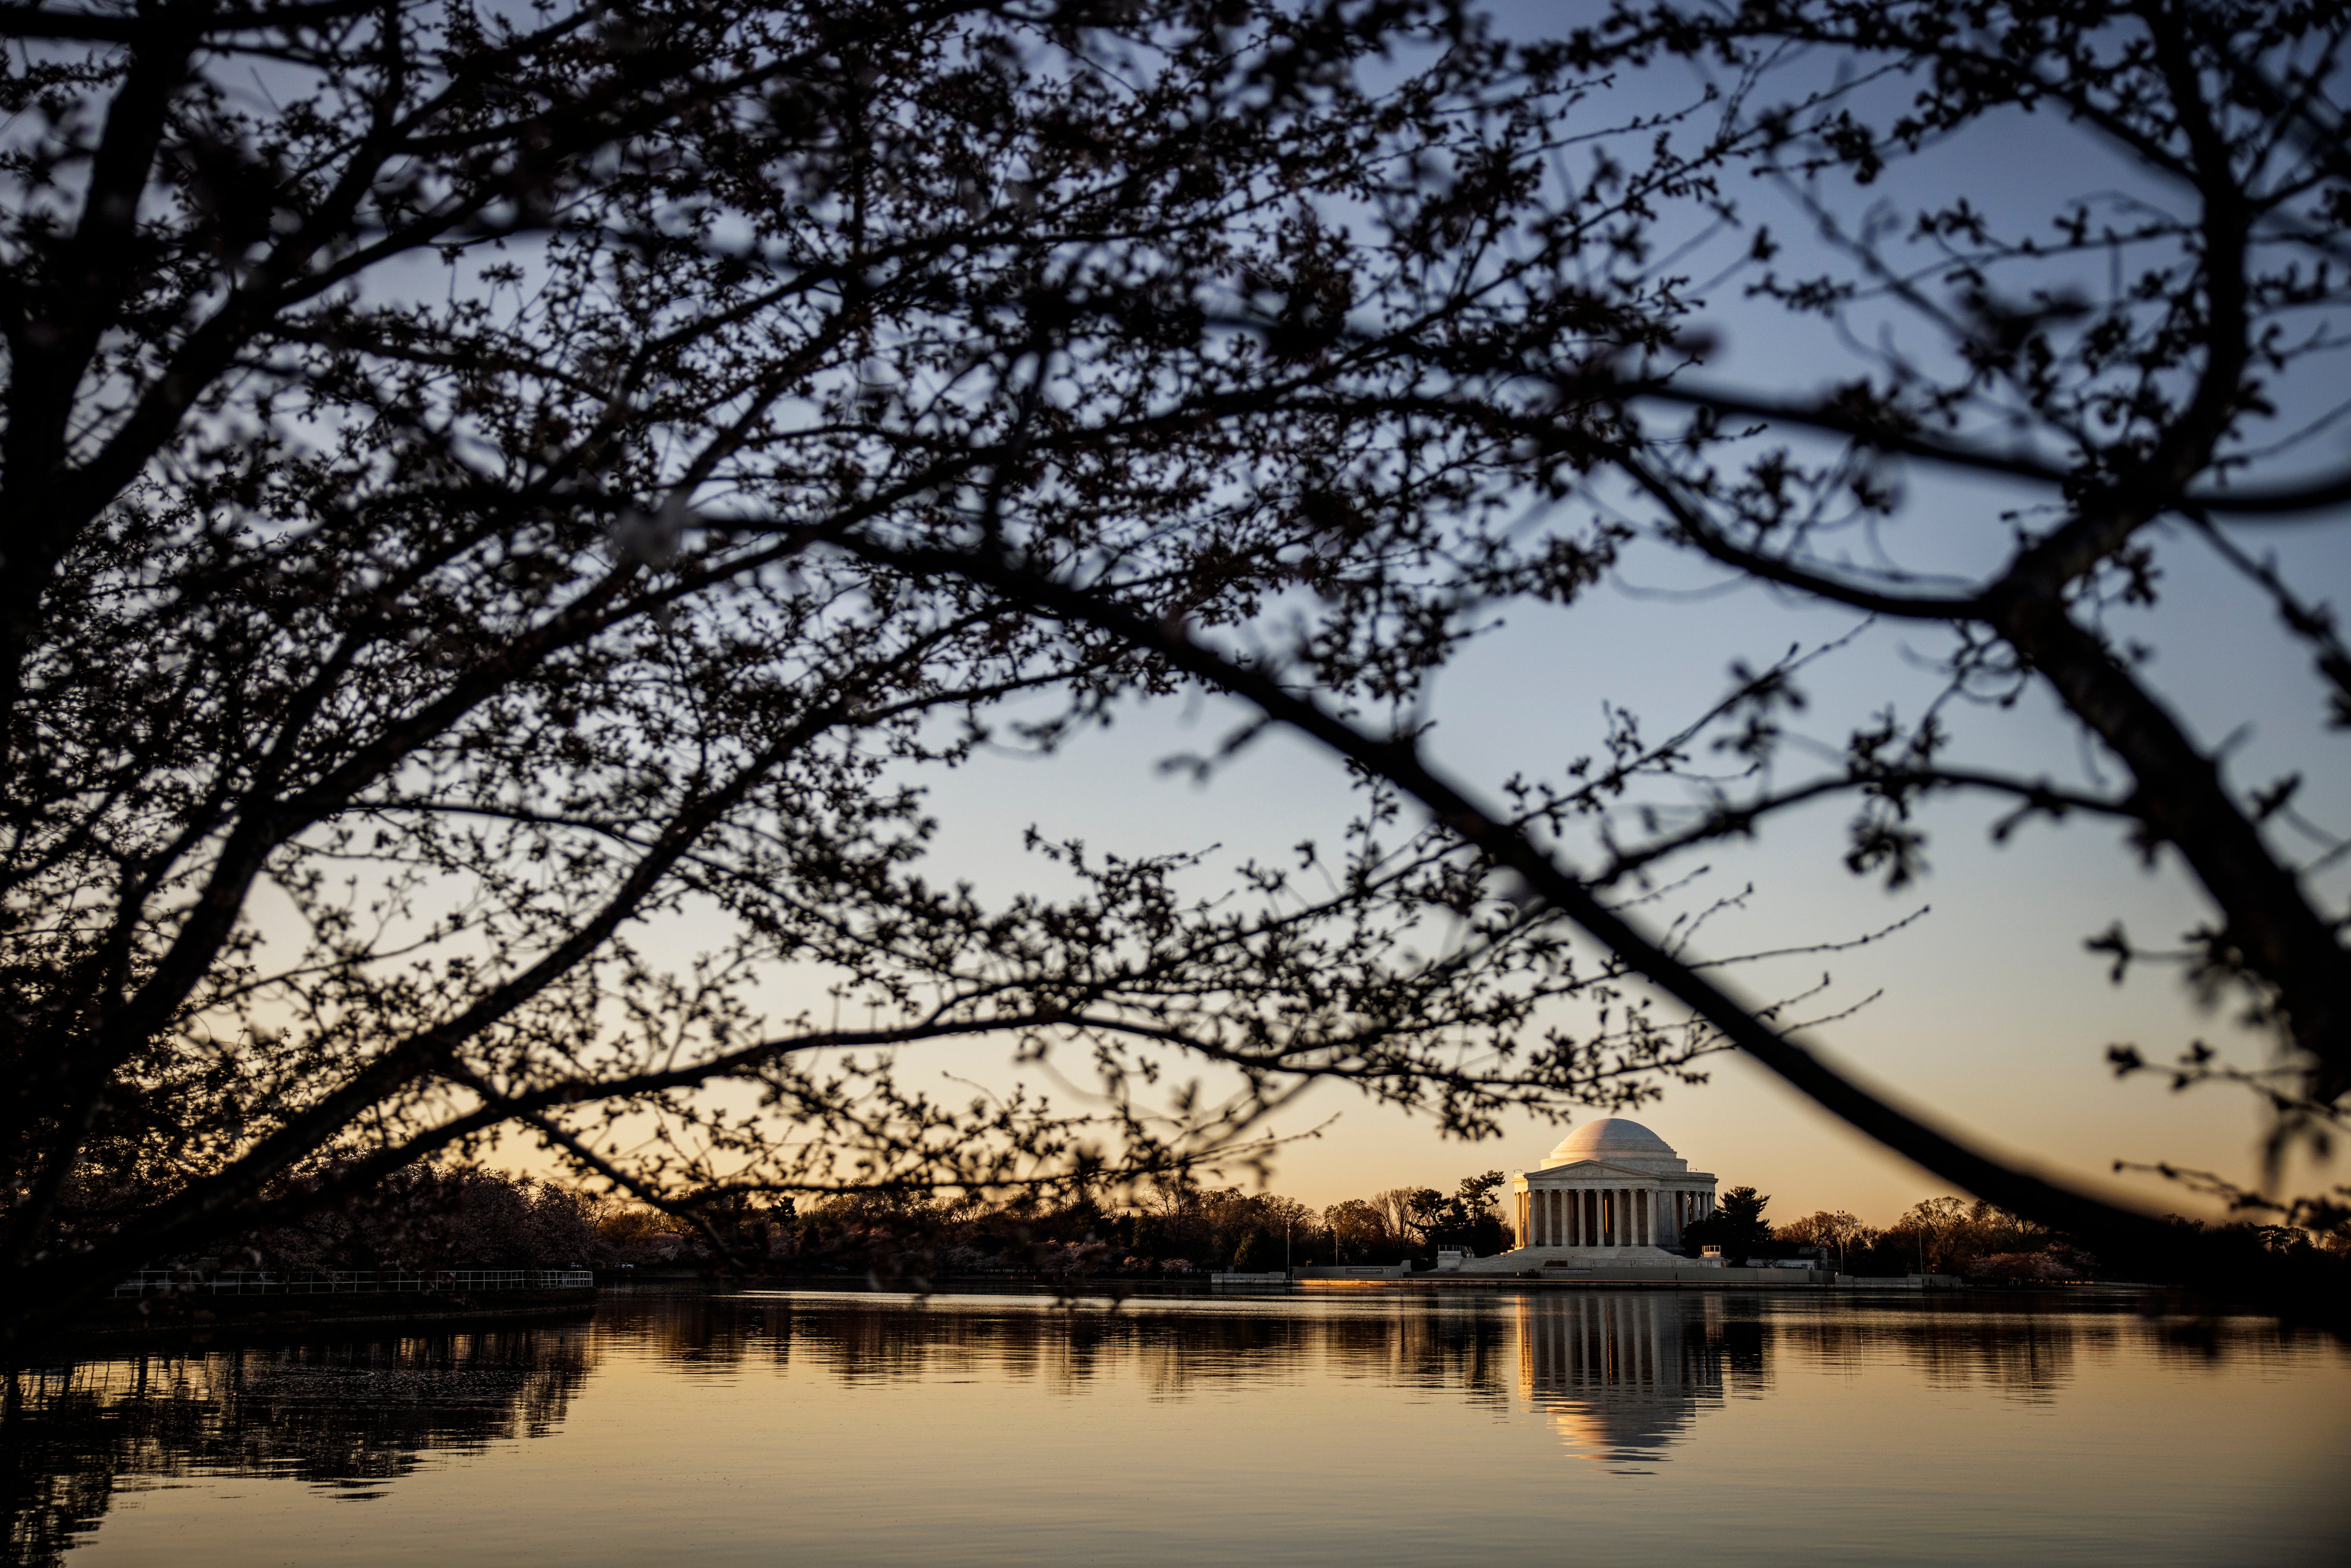 See D.C.’s Early Blooming Cherry Blossoms After a Super-Warm Winter